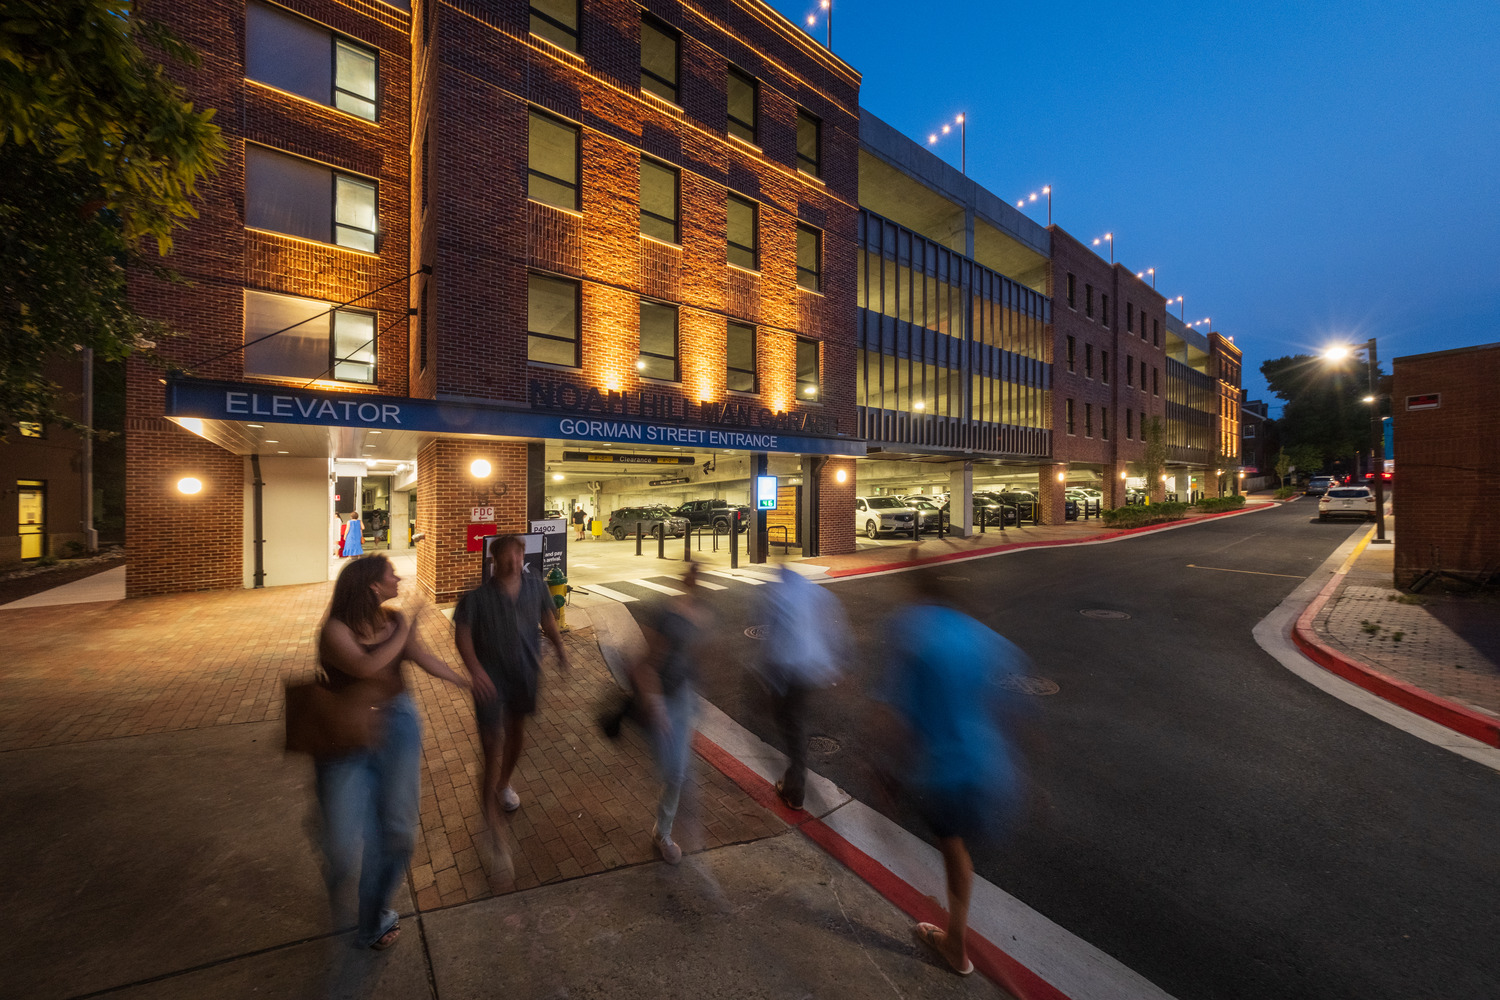 People walk on the sidewalk in front of the Hillman garage on a summer evening